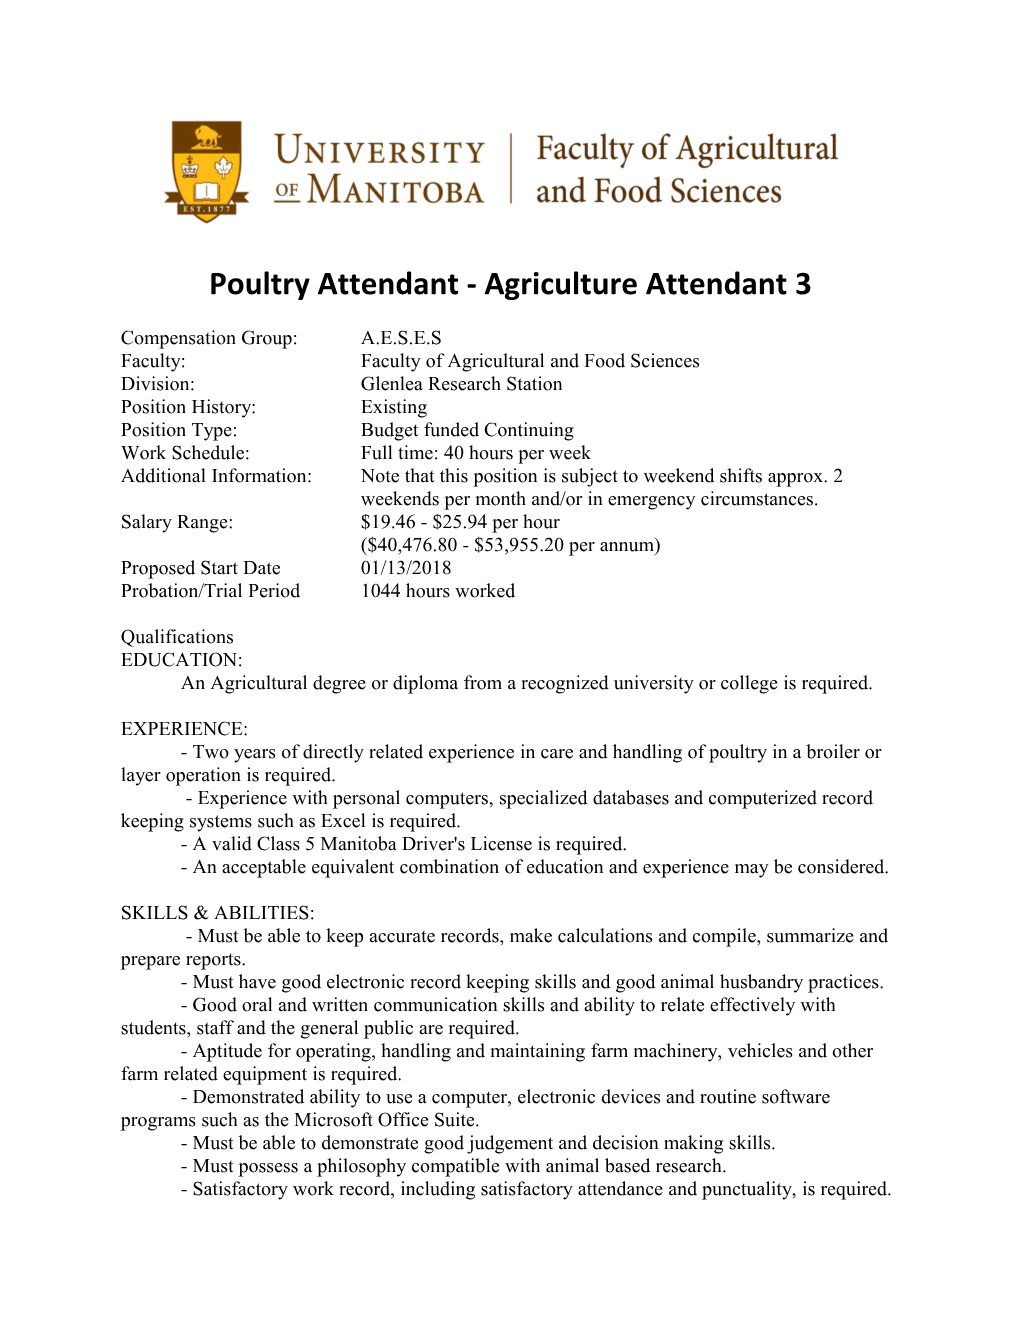 Poultry Attendant - Agriculture Attendant 3